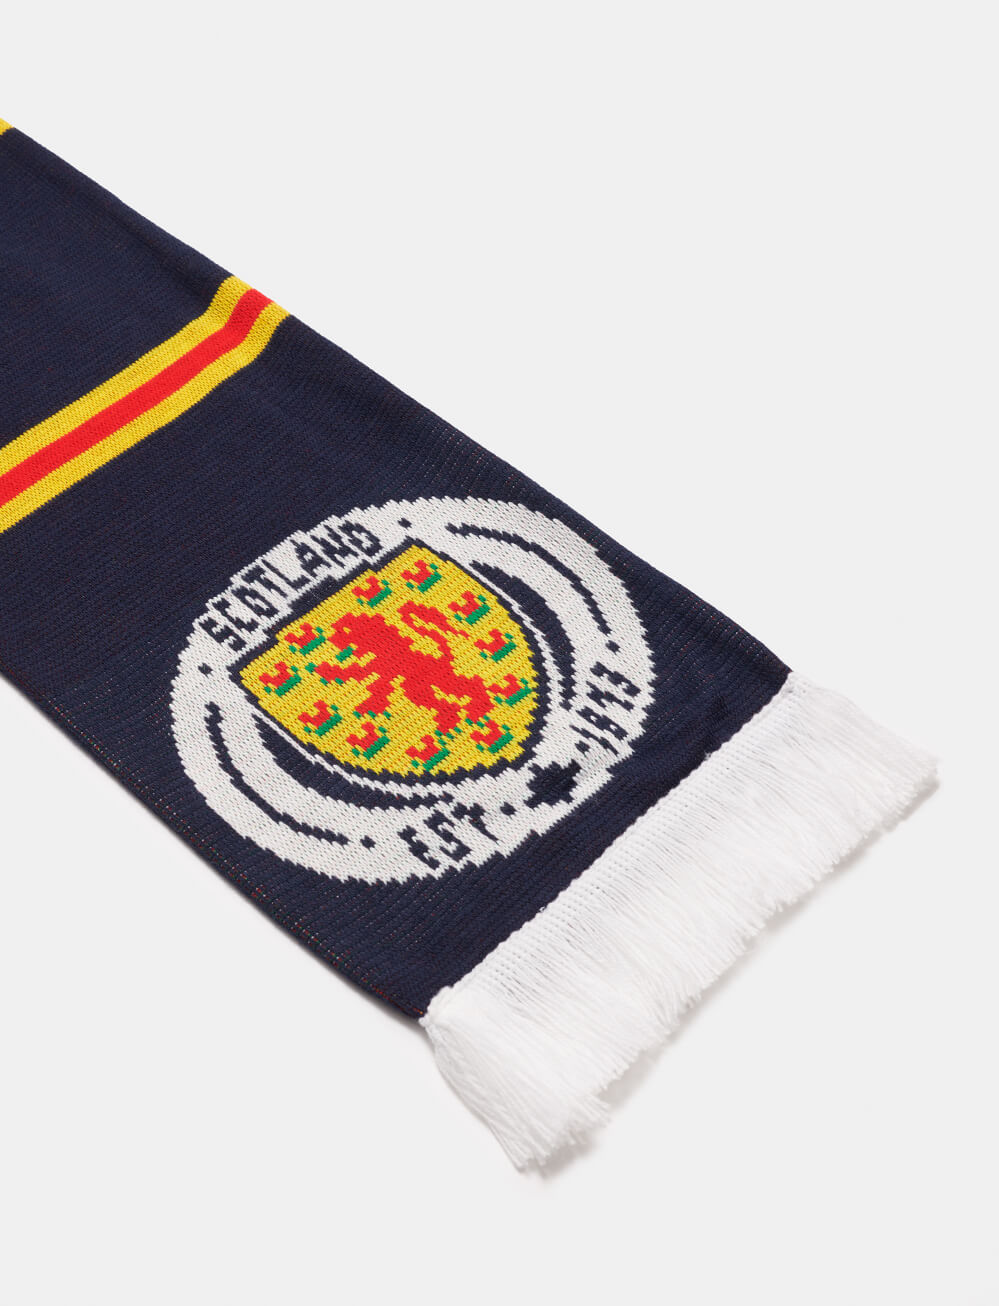 Official Team Scotland Striped Scarf - The World Football Store